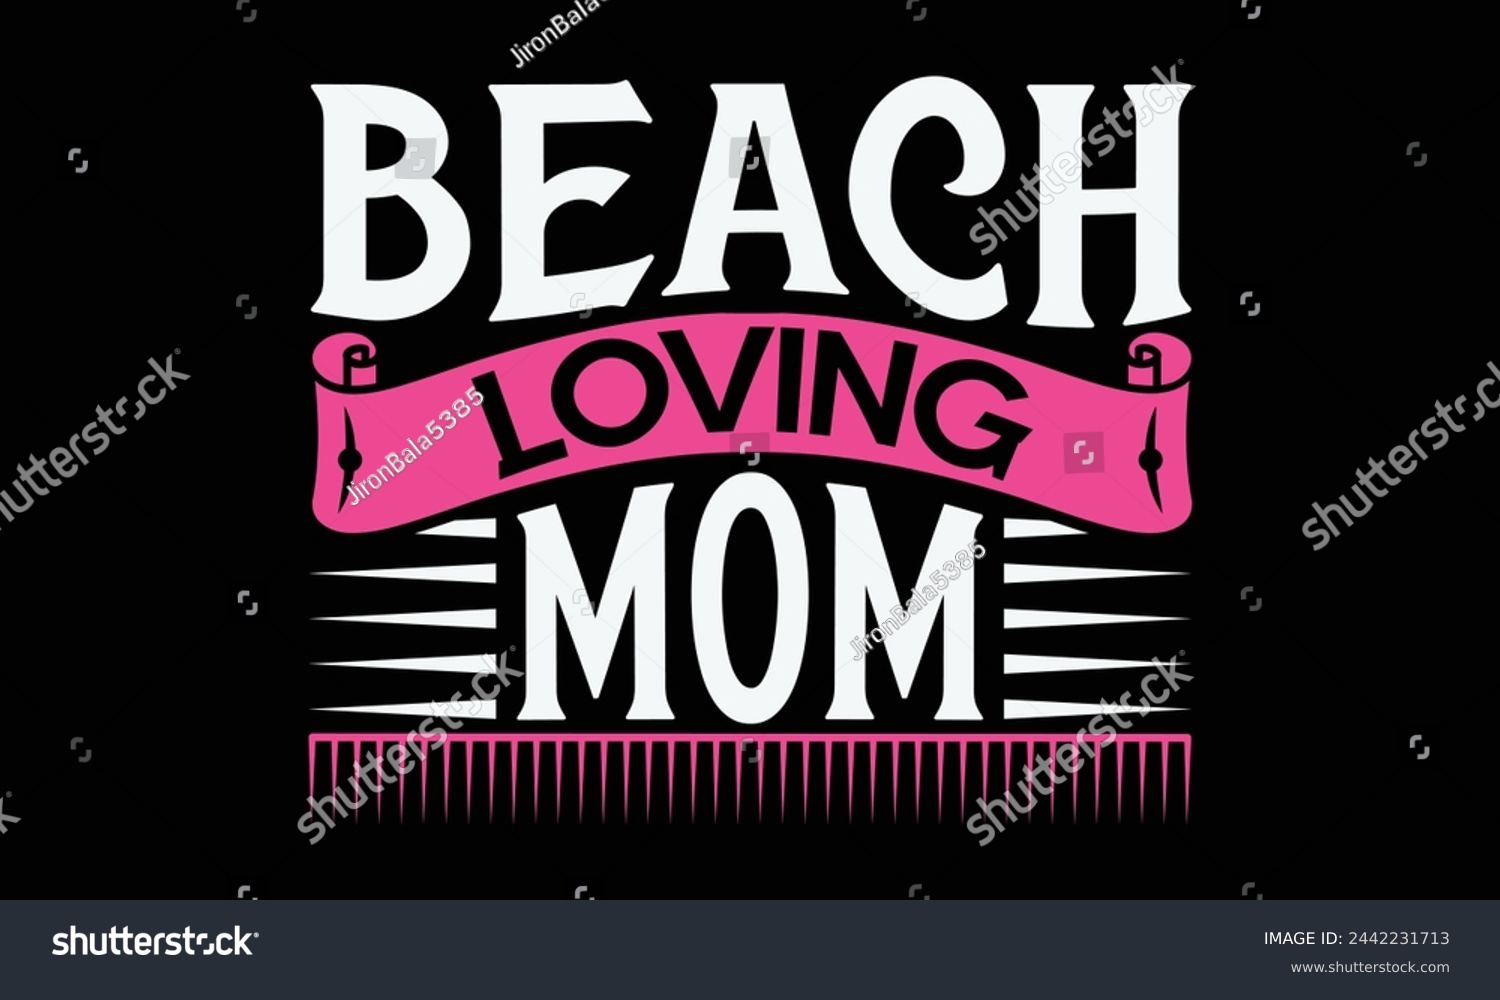 SVG of Beach loving mom - Mom t-shirt design, isolated on white background, this illustration can be used as a print on t-shirts and bags, cover book, template, stationary or as a poster. svg